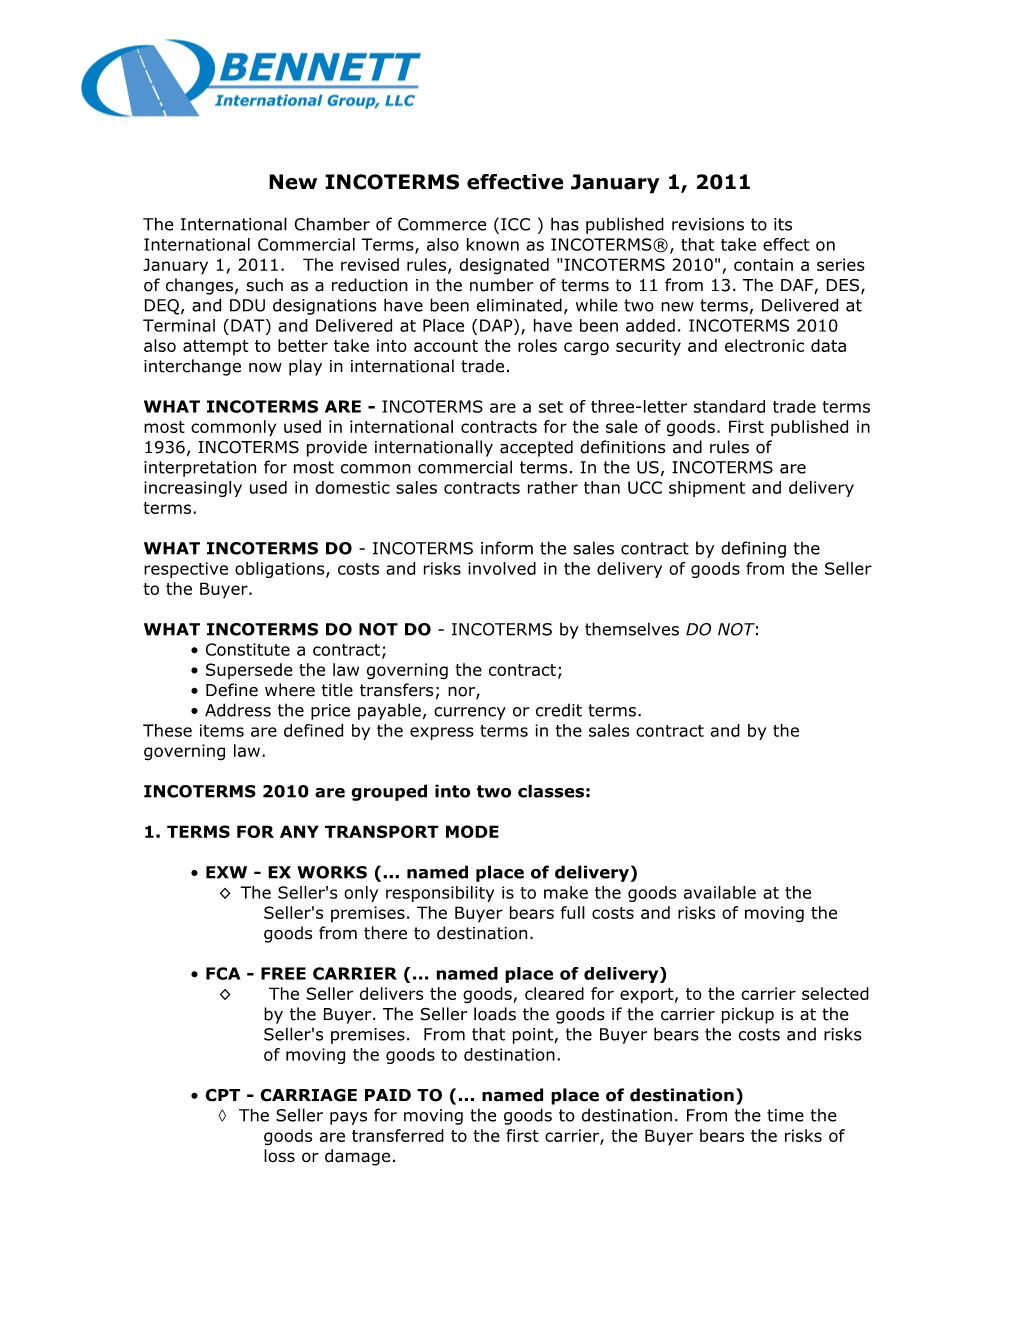 New INCOTERMS Effective January 1, 2011